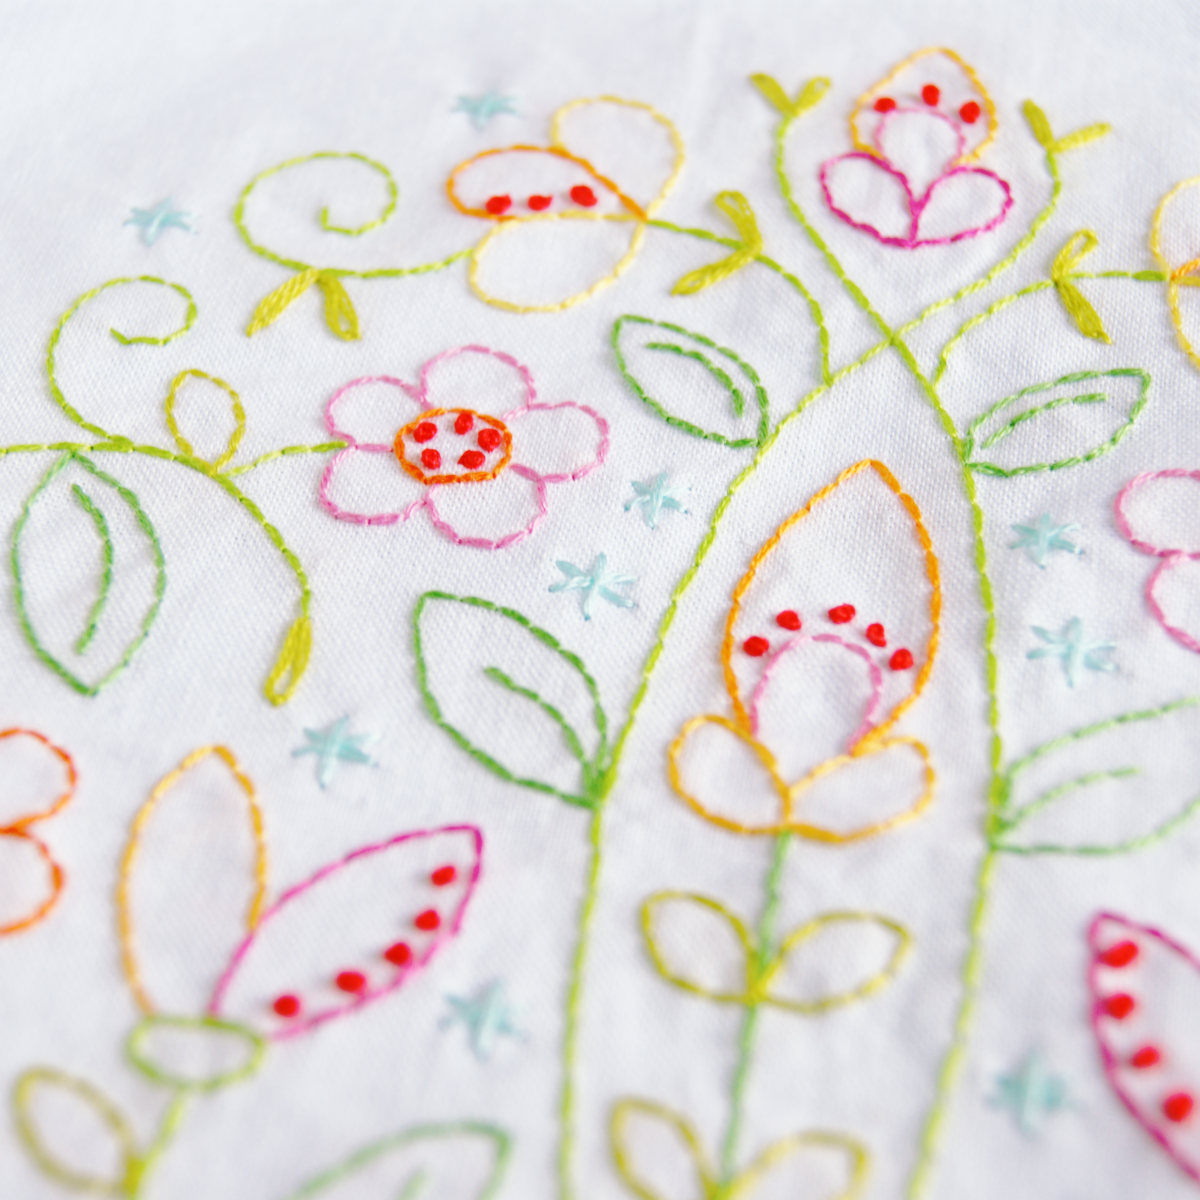 Embroidery Patterns Flowers May Flowers Embroidery Pattern Polka Bloom